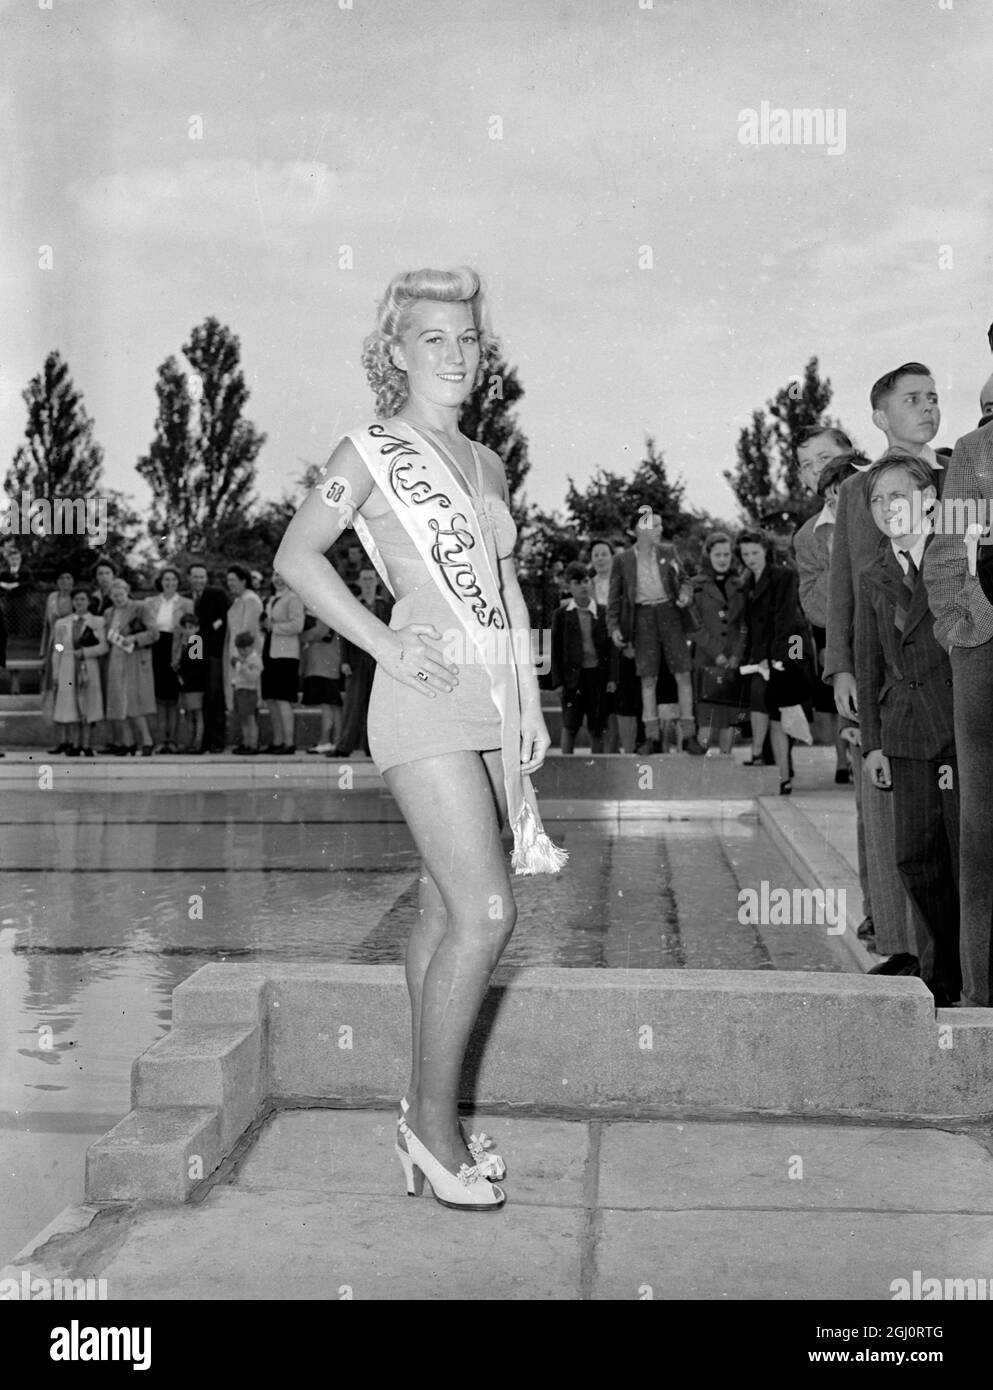 PATRICIA ROC AND TEN BEAUTY QUEENS ATTENDED LYONS CLUB ANNUAL SPORTS Ten Beauty Queens from London Boroughs attended the Lyons Club annual sports and carnival at Sudbury to-day. They served as models for Patricia Roc and Trevor Howard, who have to decide which ''Nippy'' shall be ''Miss Lyons'' of 1947. The new Lyons Queen will make a ''state drive'' round the sports arena this evening. Ten hours of carnival are provided in addition to boxing, diving and swimming displays. The evening closes with a fireworks display. Photo Shows: ''Miss Lyons 1947'' - Miss Lilly Layton of Wembley, who is a swim Stock Photo